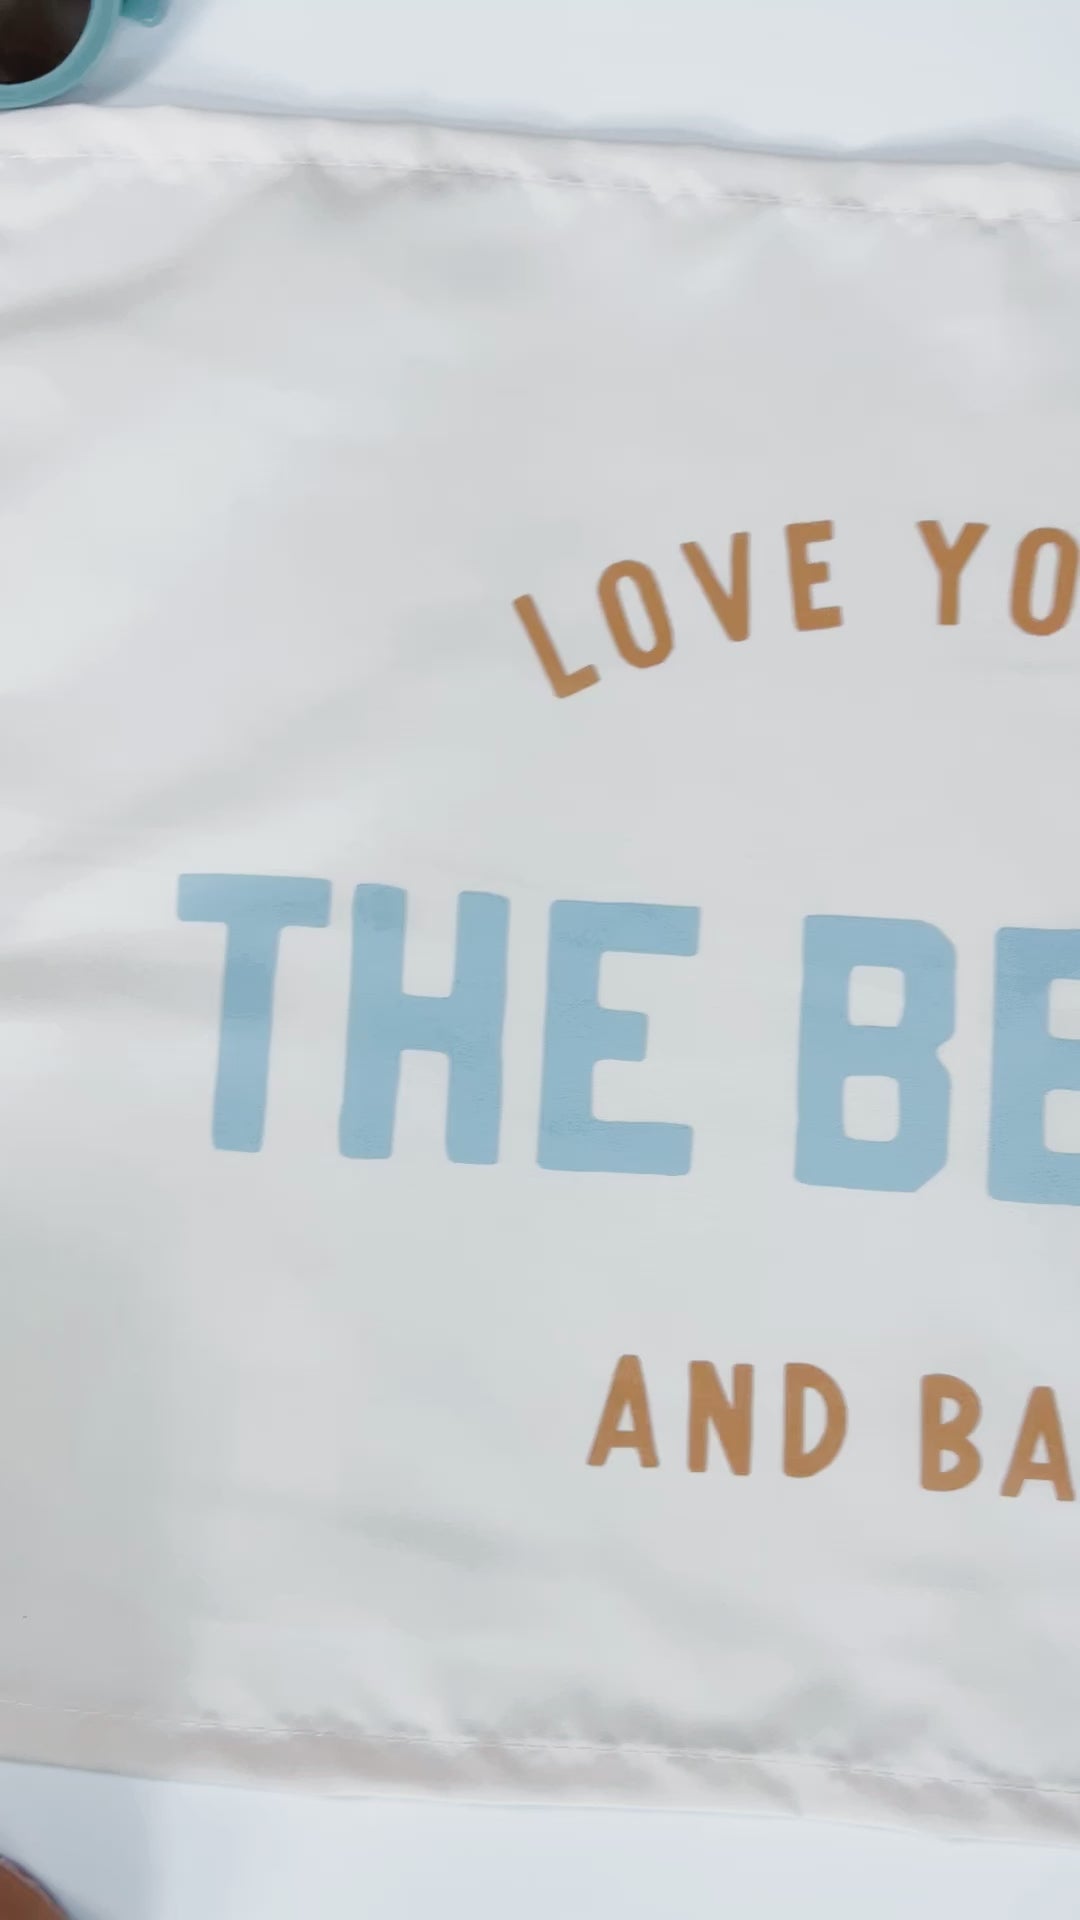 {Tidal Blue + Gold} Love You to the Beach And Back Banner